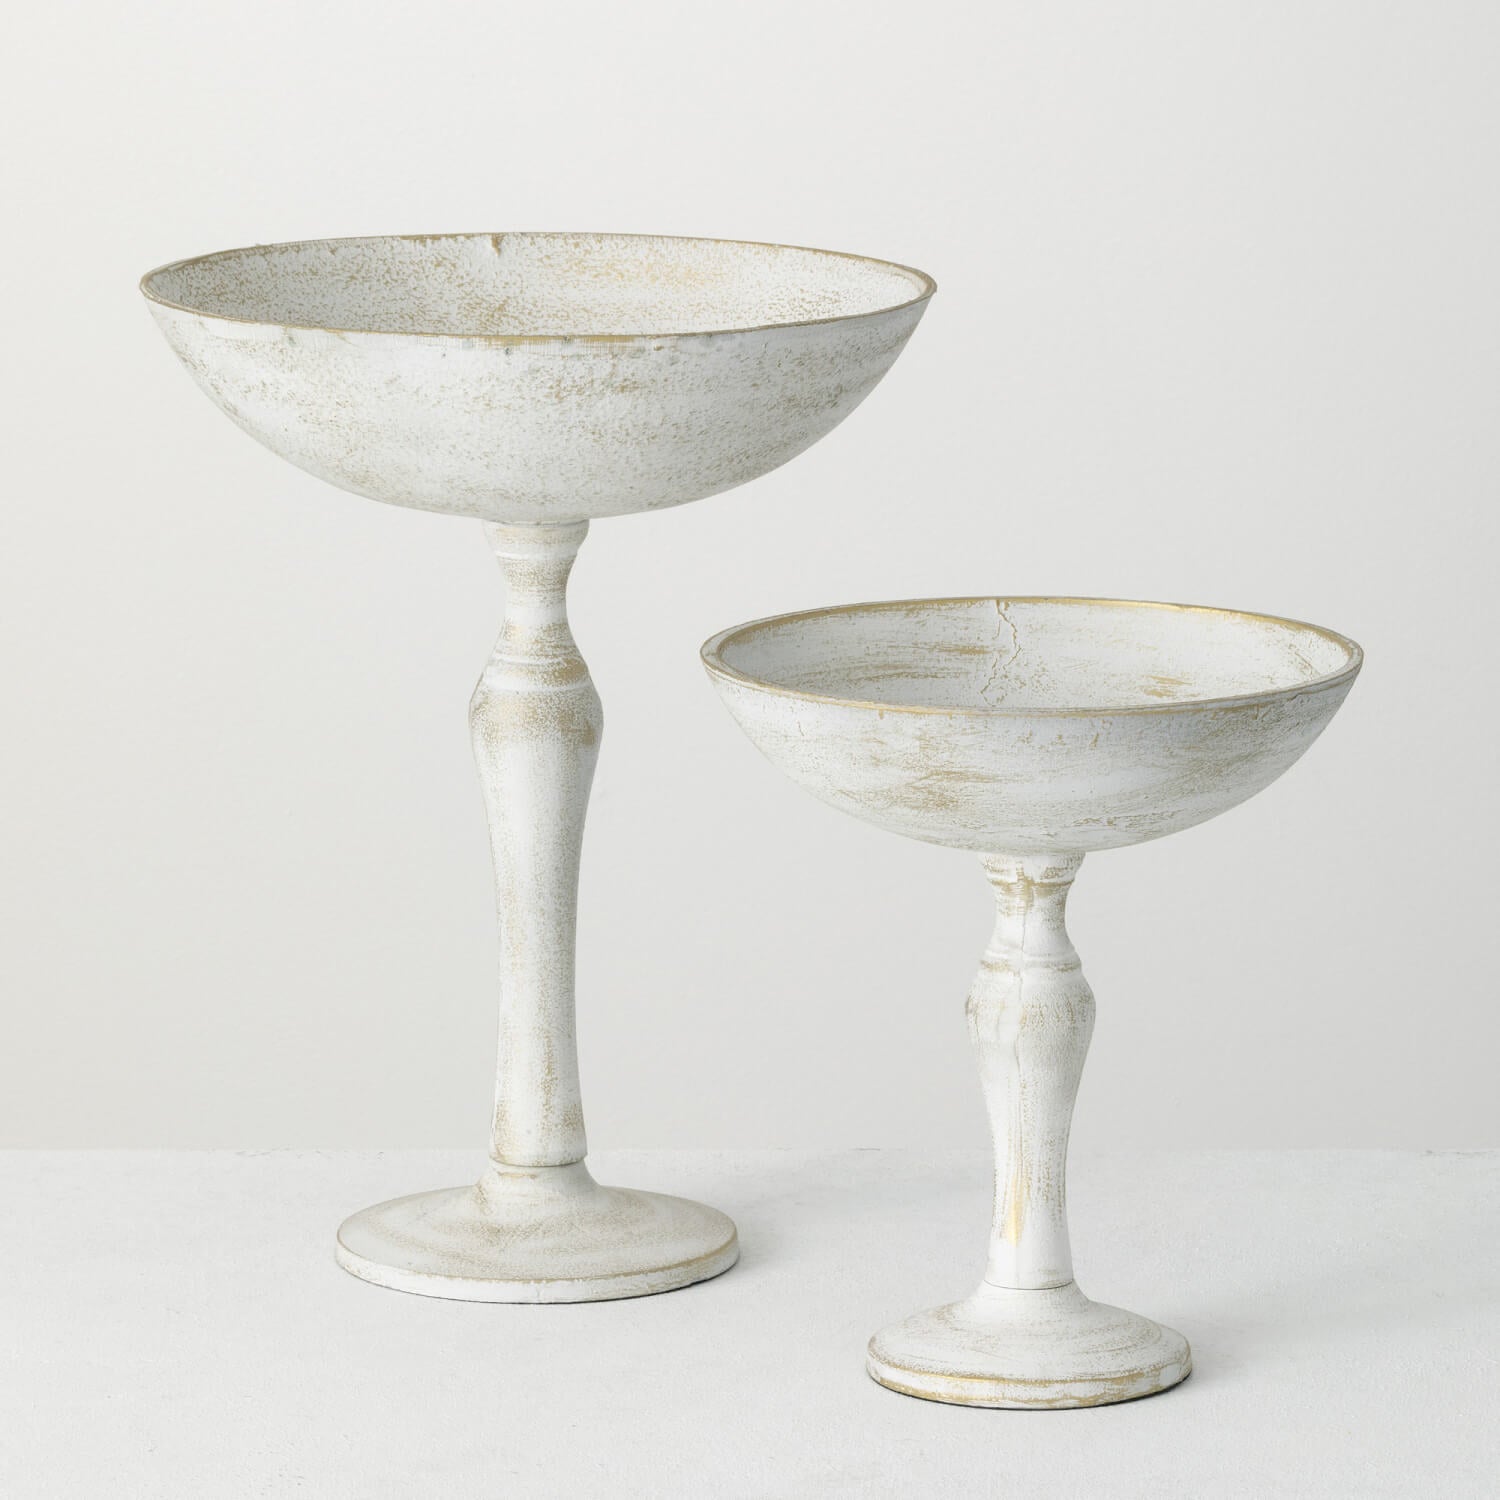 small and large rustic pedestal bowls on a white background